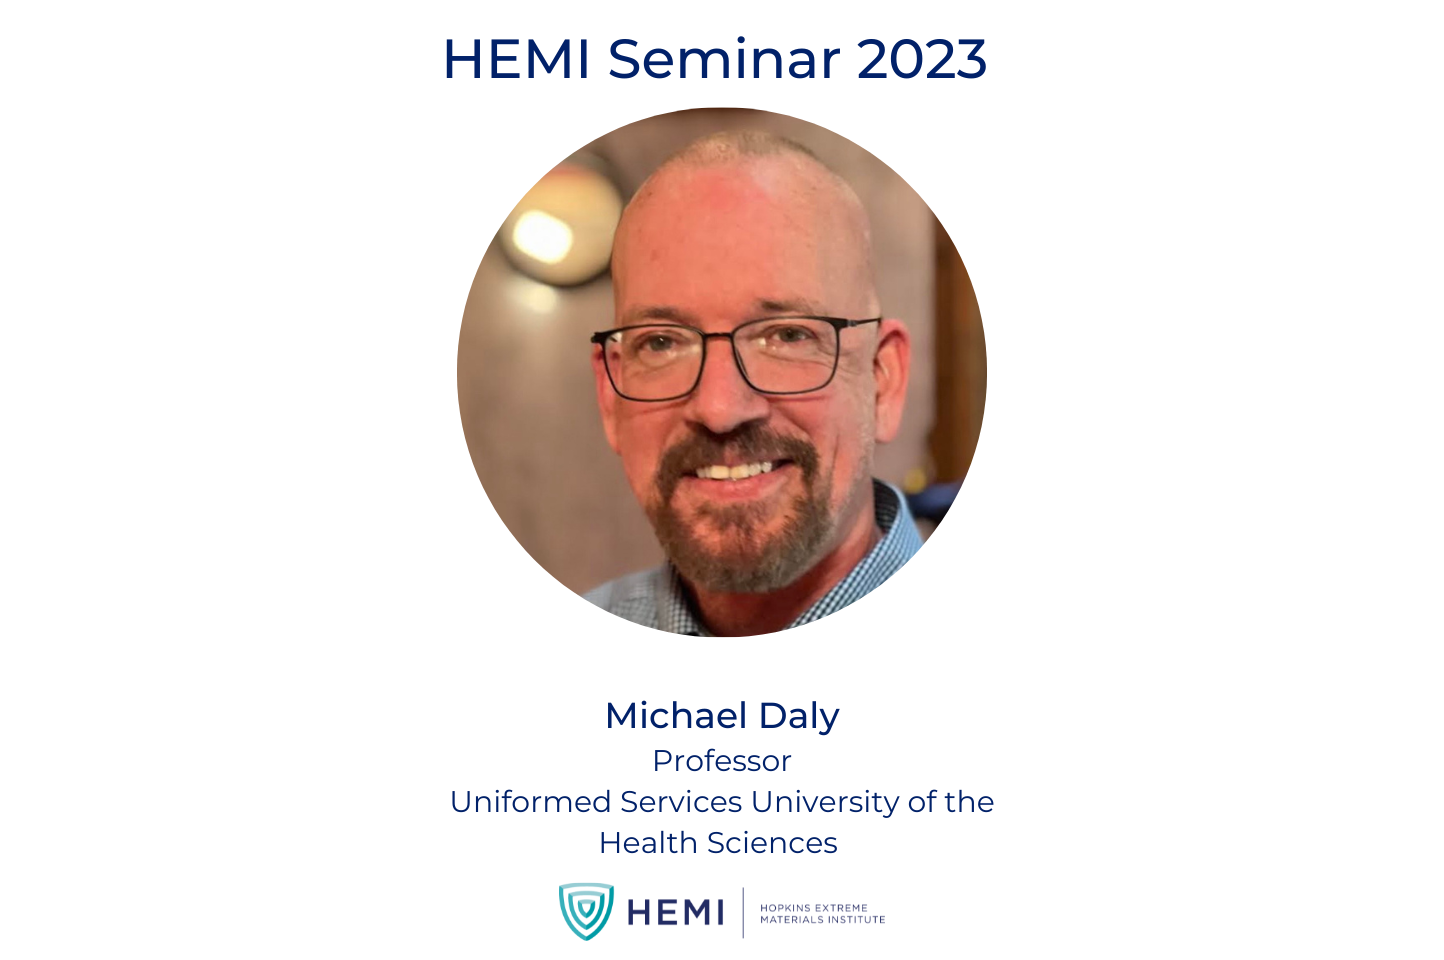 Headshot of Michael Daly and HEMI logo with text: "HEMI Seminar 2023, Michael Daly, Professor, Uniformed Services University of the Health Sciences"